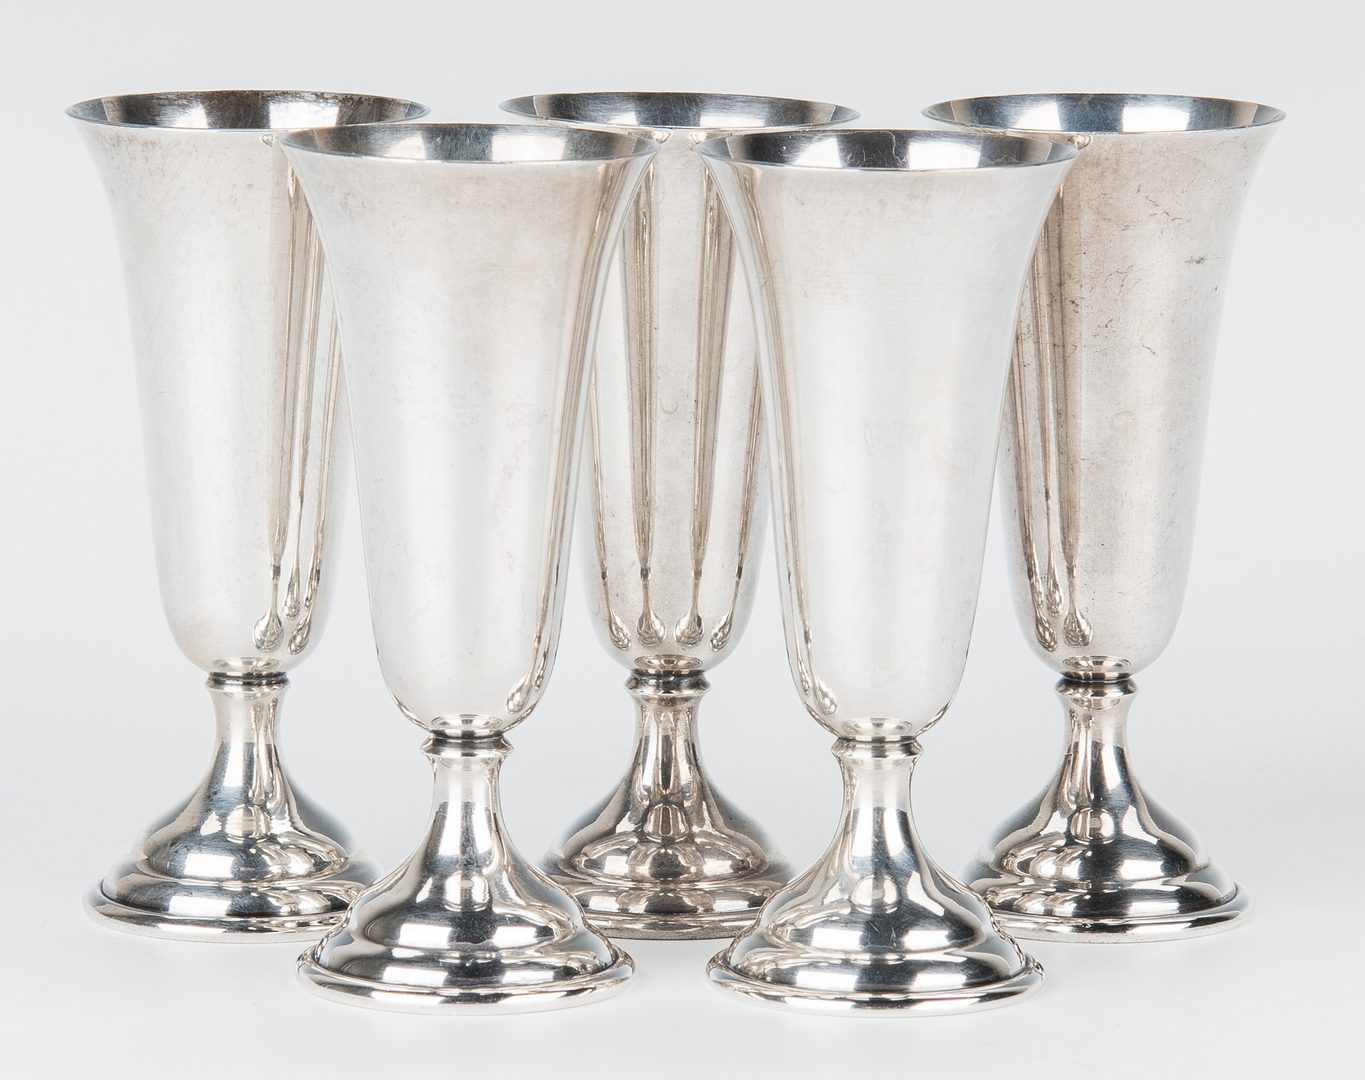 Lot 691: Sterling Silver Plates, Goblets & Cups, 37 items total